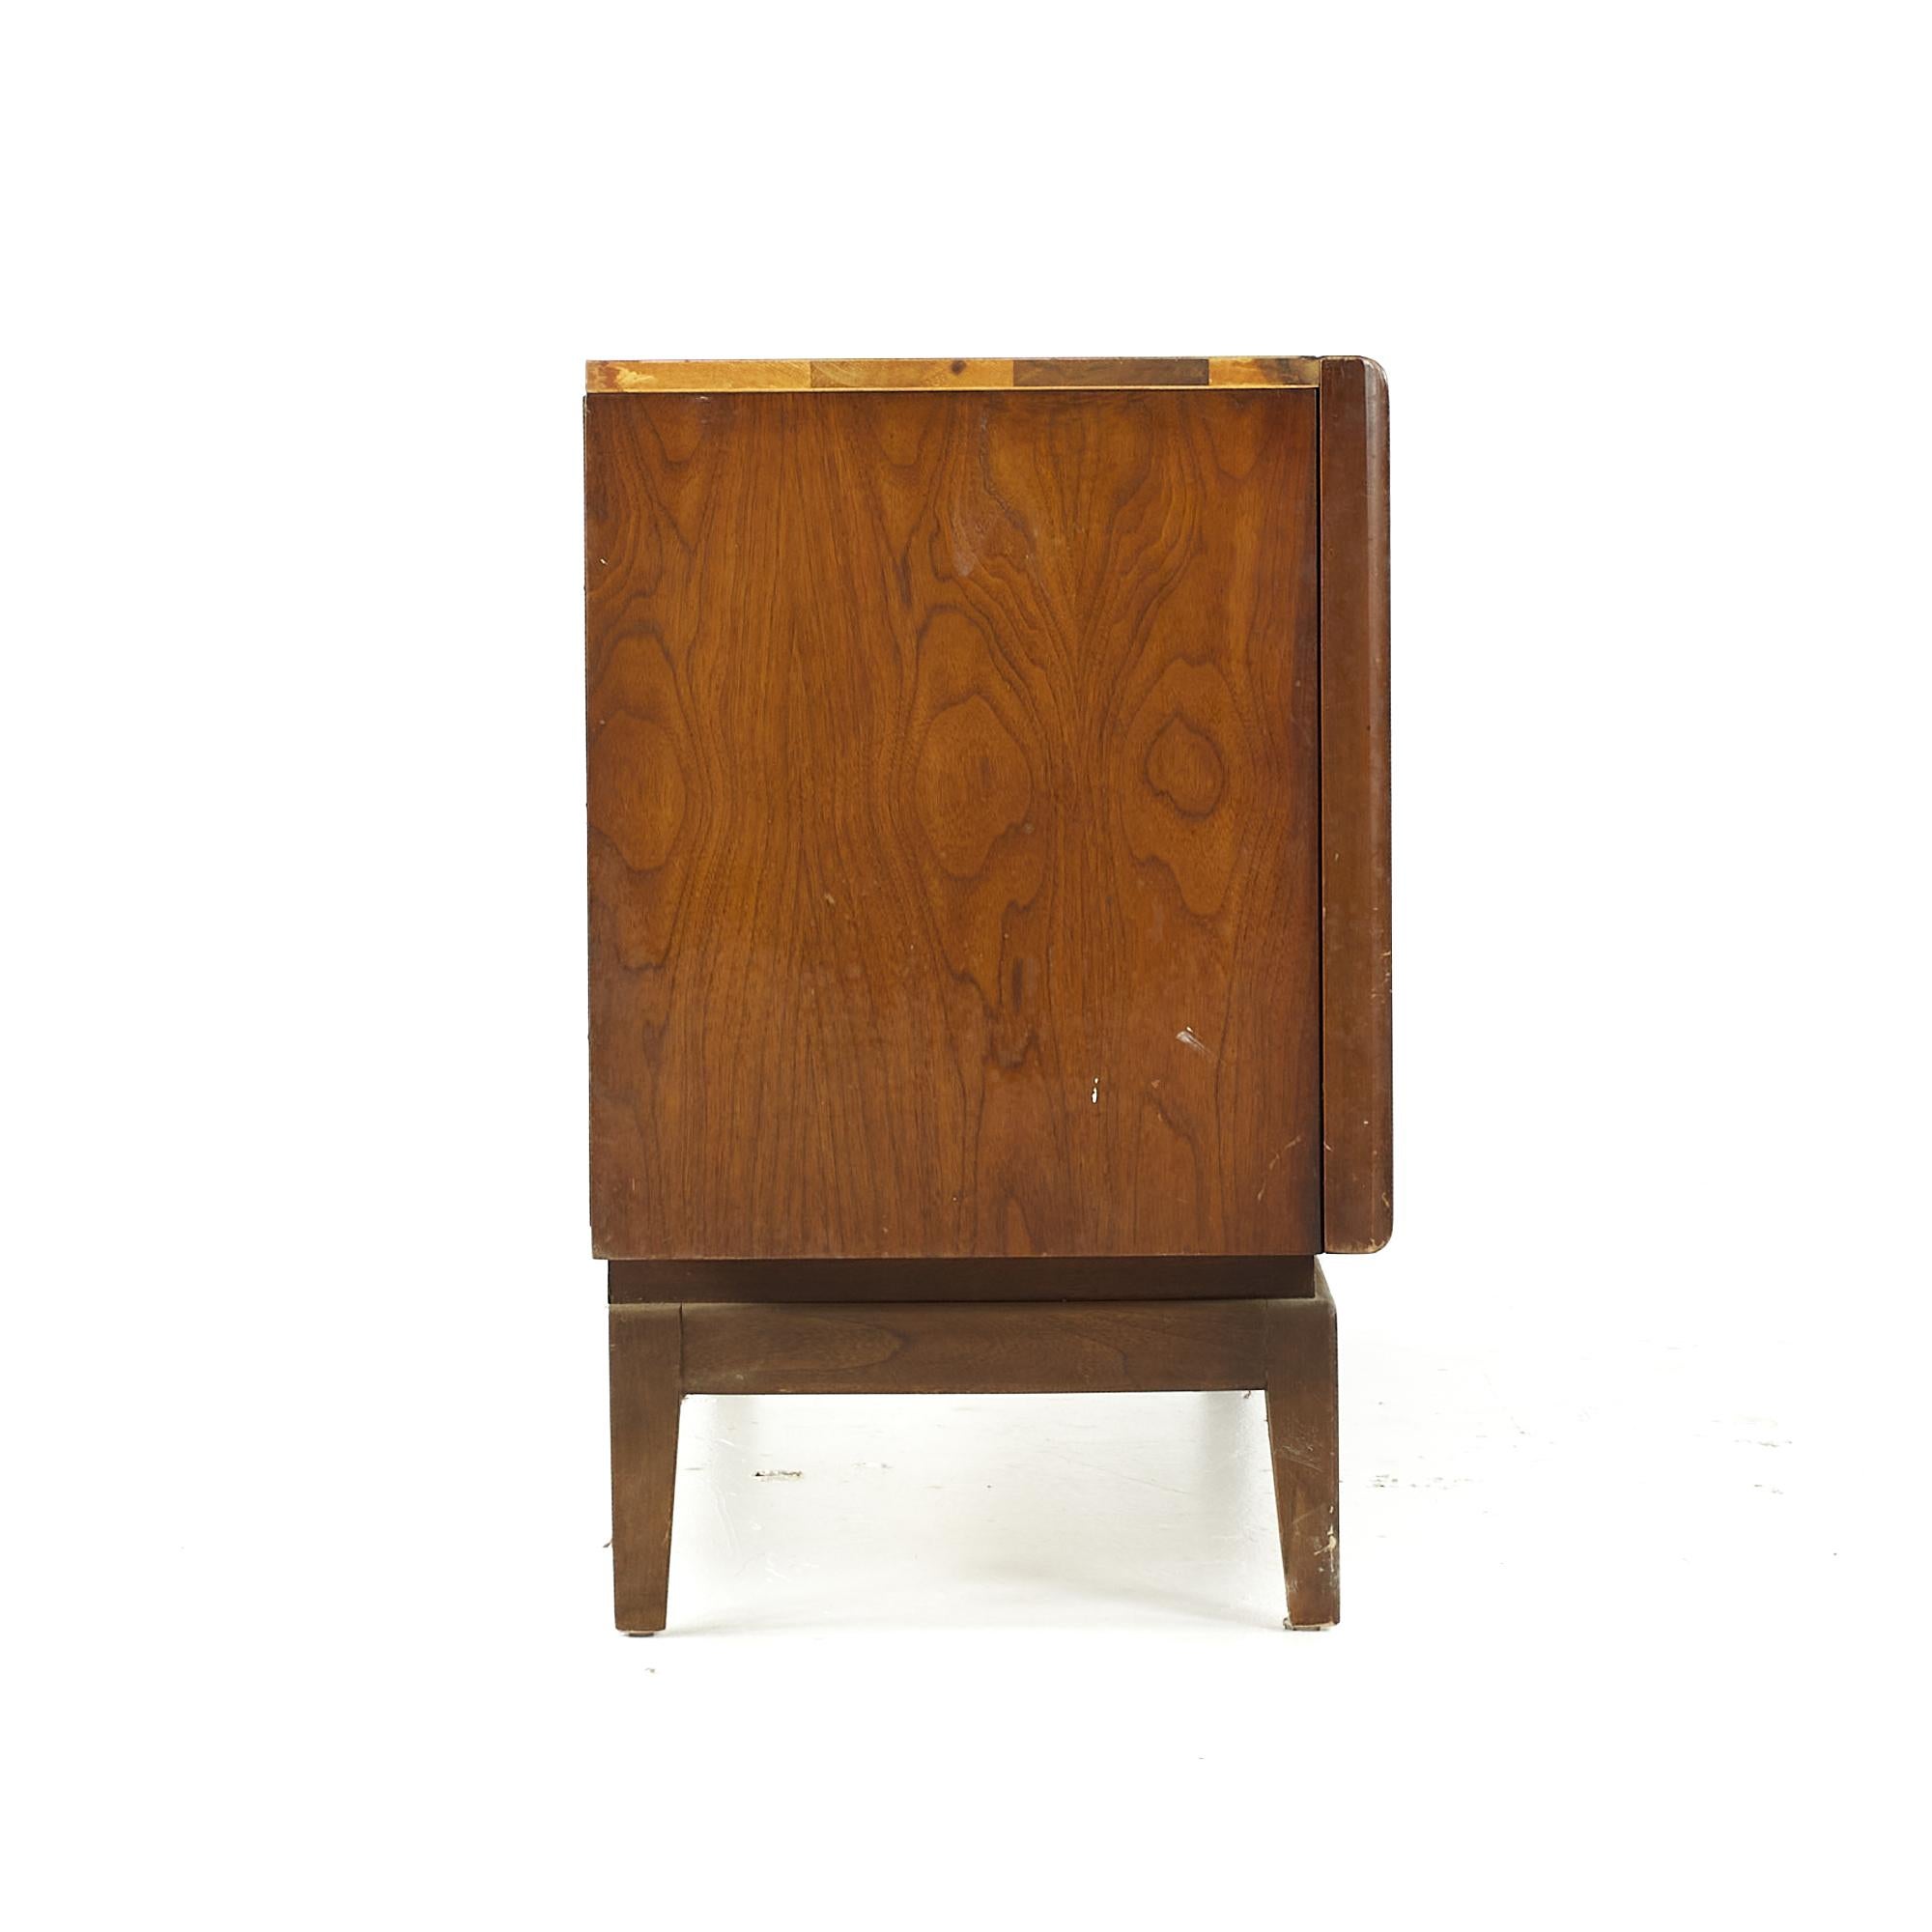 United Midcentury Diamond Walnut Lowboy 9 Drawer Dresser In Good Condition For Sale In Countryside, IL